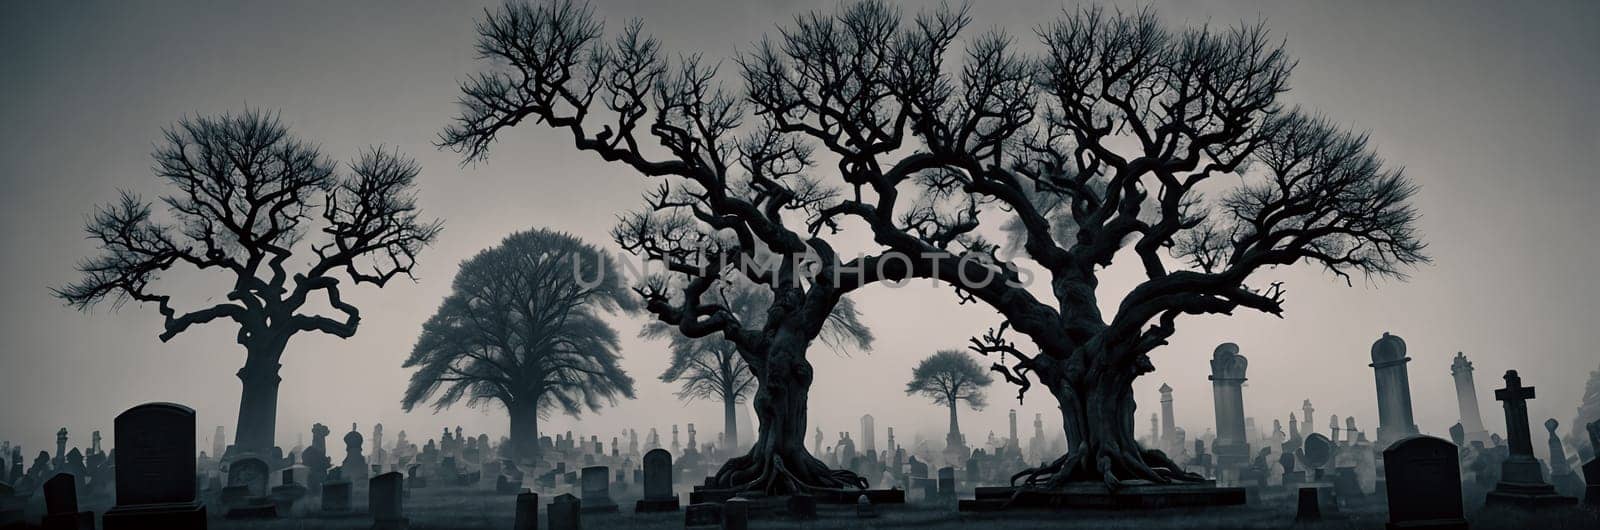 A hauntingly beautiful graveyard shrouded in mist, with weathered tombstones standing sentinel amidst gnarled trees and twisted branches reaching towards the moon.